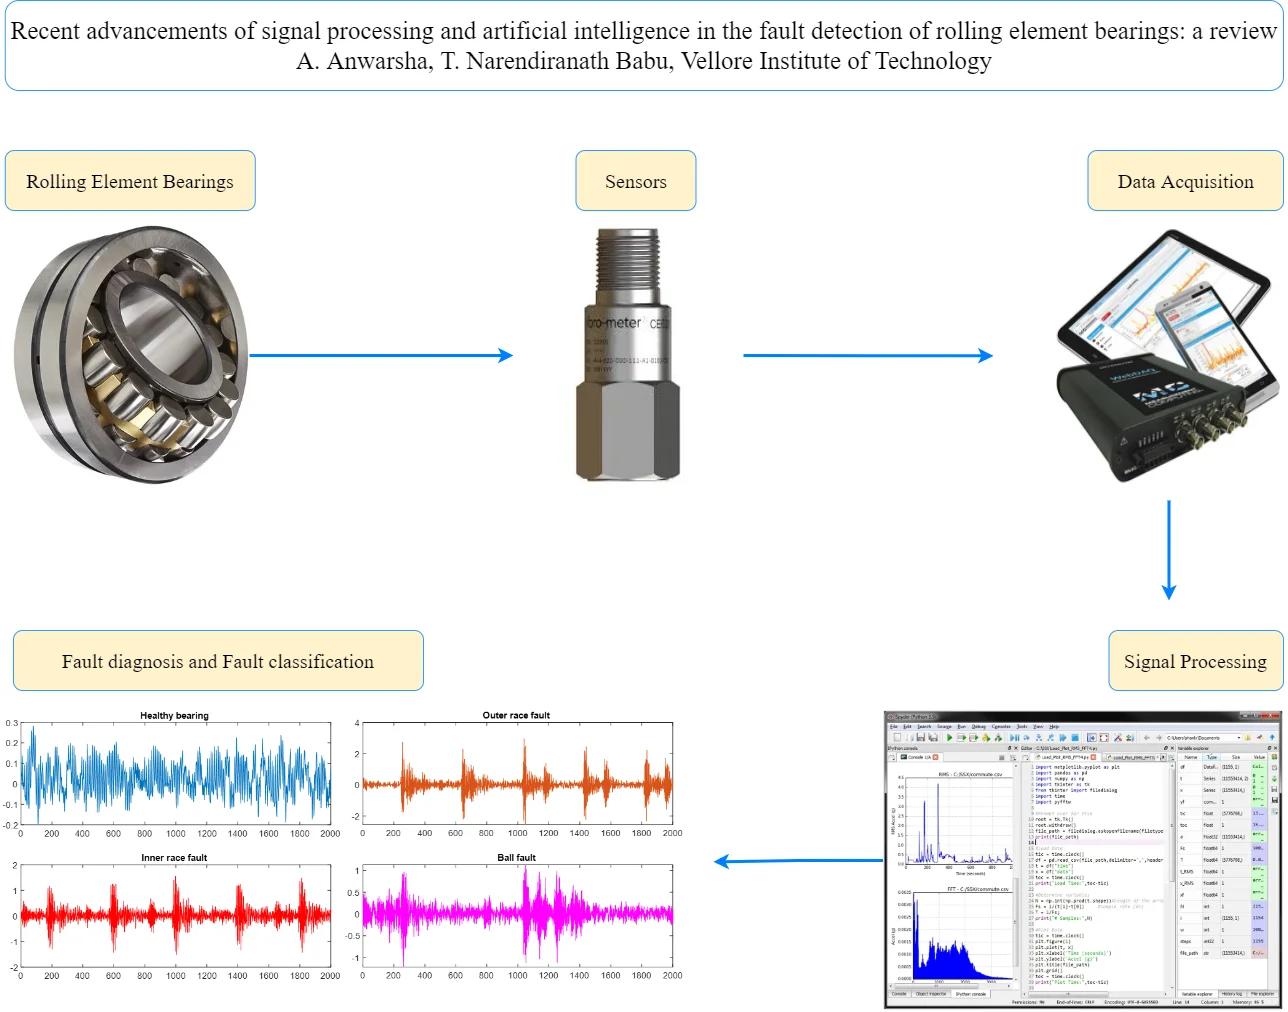 Recent advancements of signal processing and artificial intelligence in the fault detection of rolling element bearings: a review